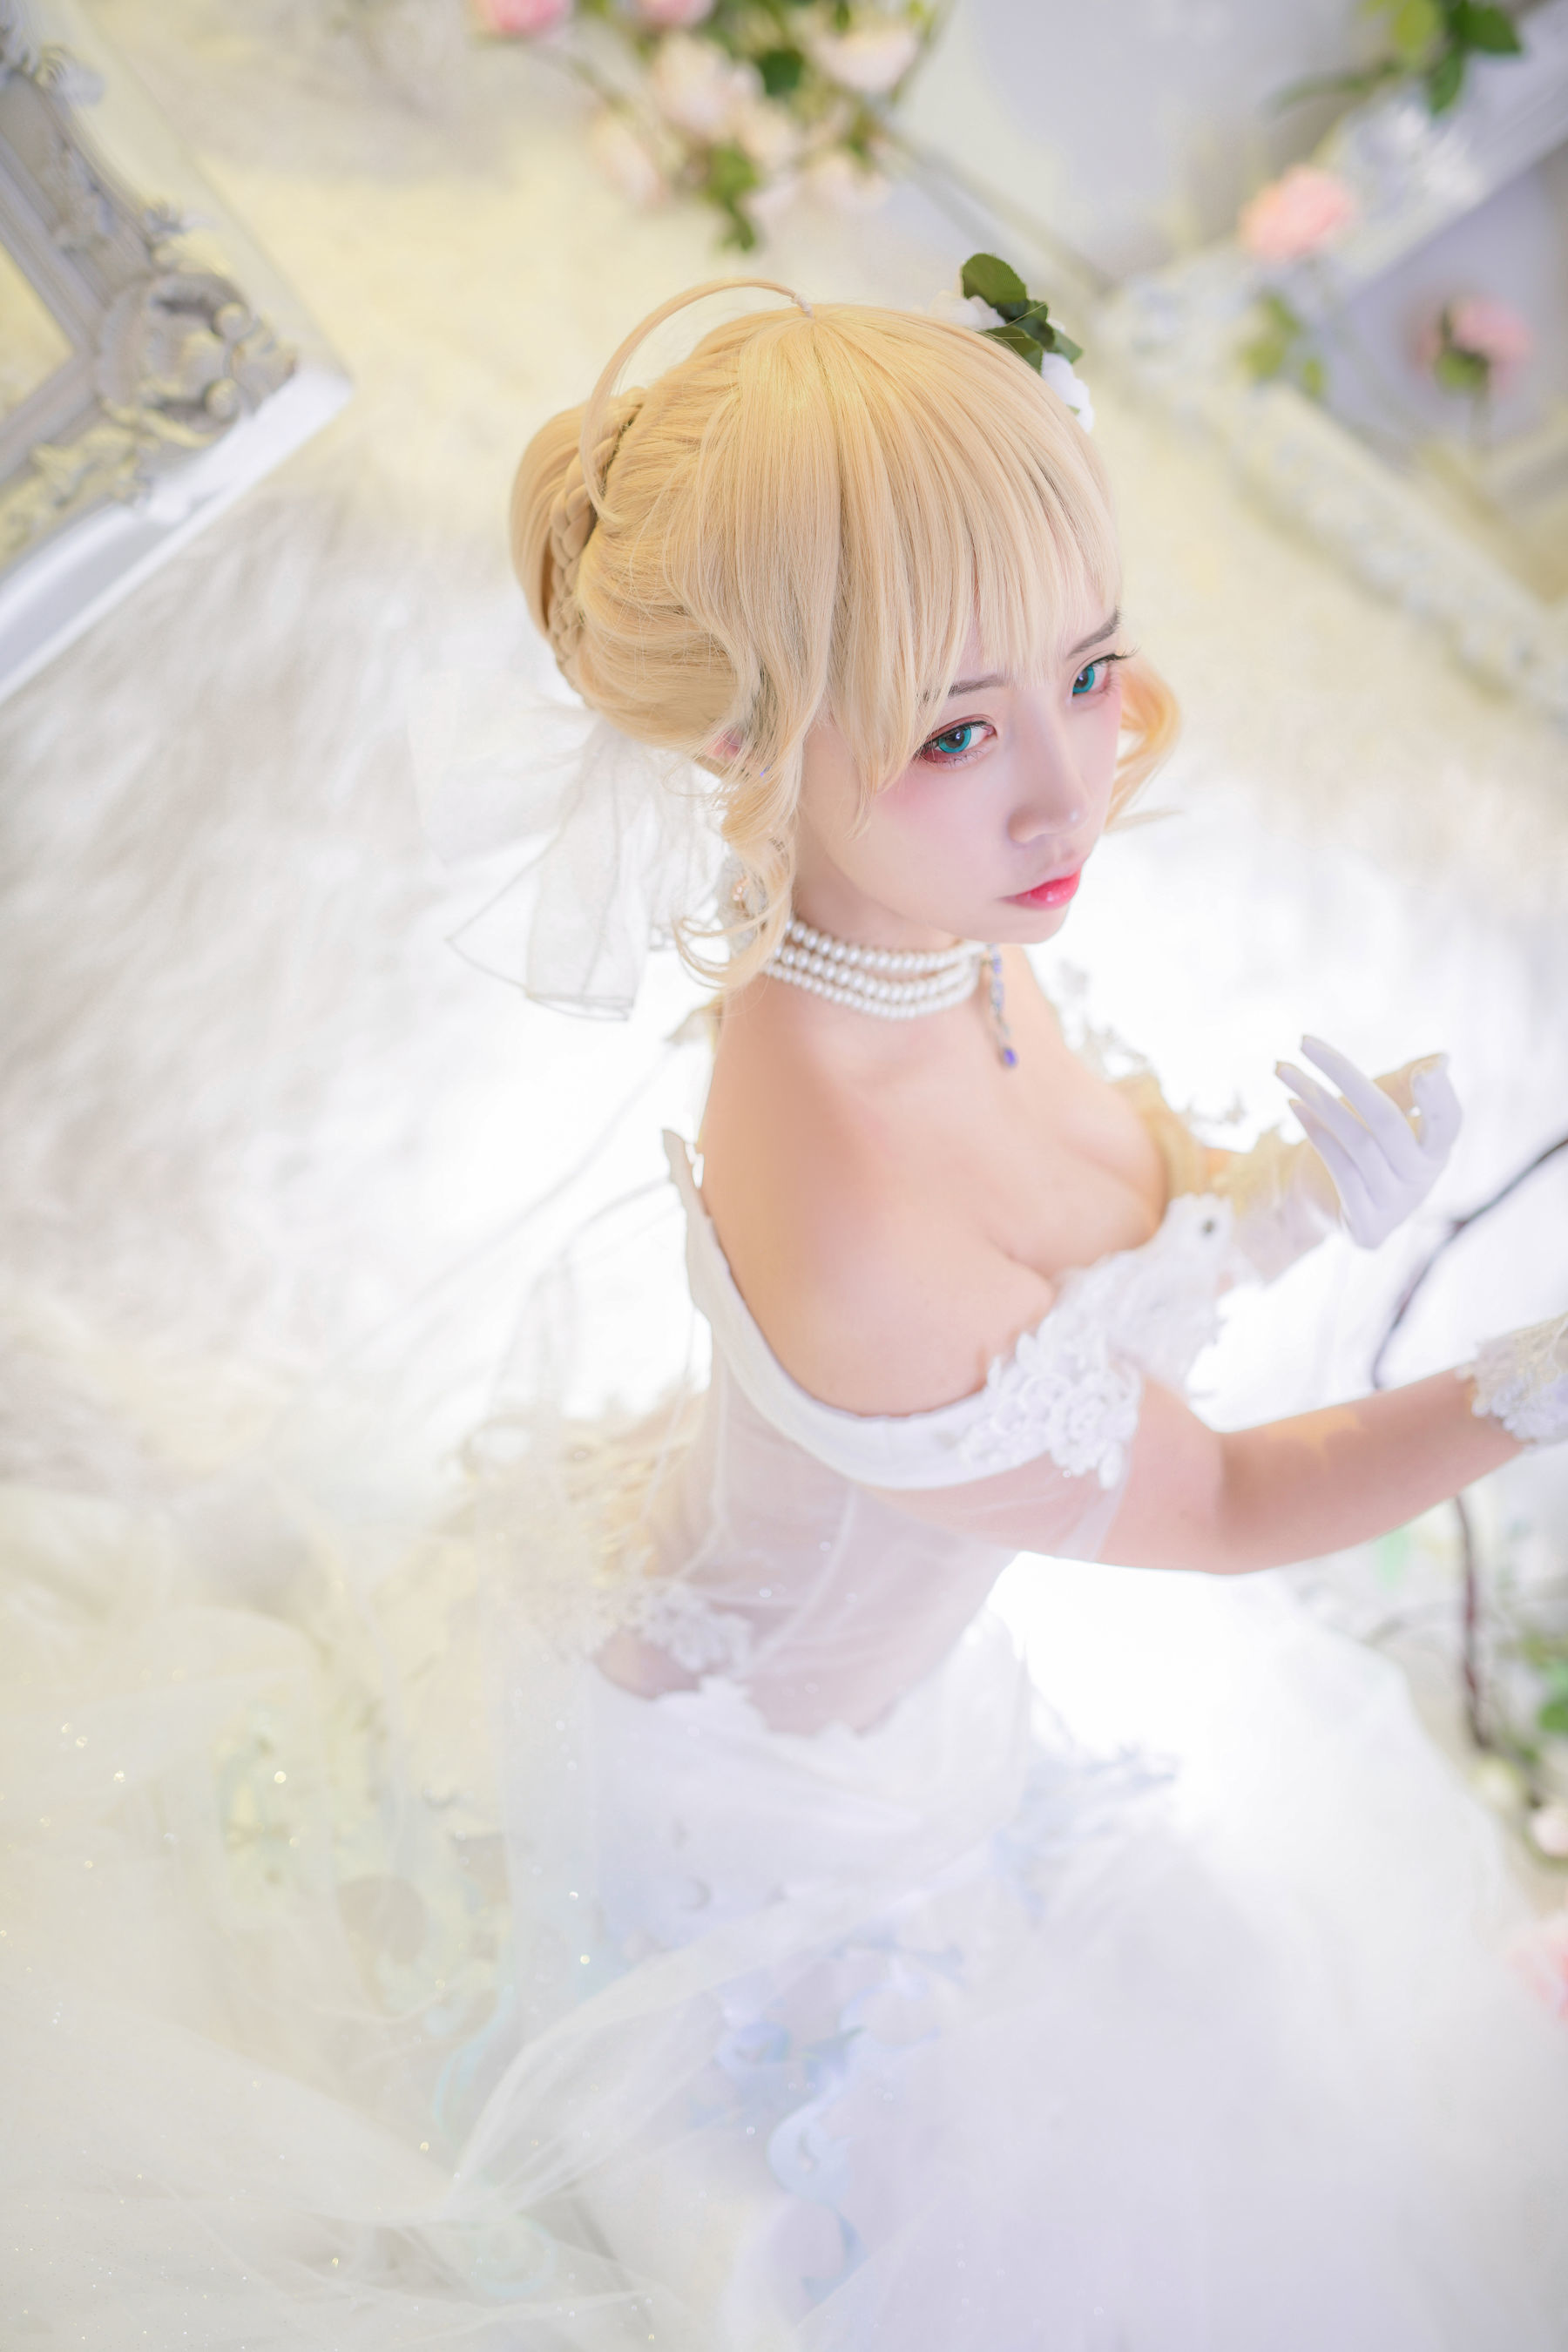 Coser Erzo Nisa "The Flower Marriage" Page 14 No.b292a0